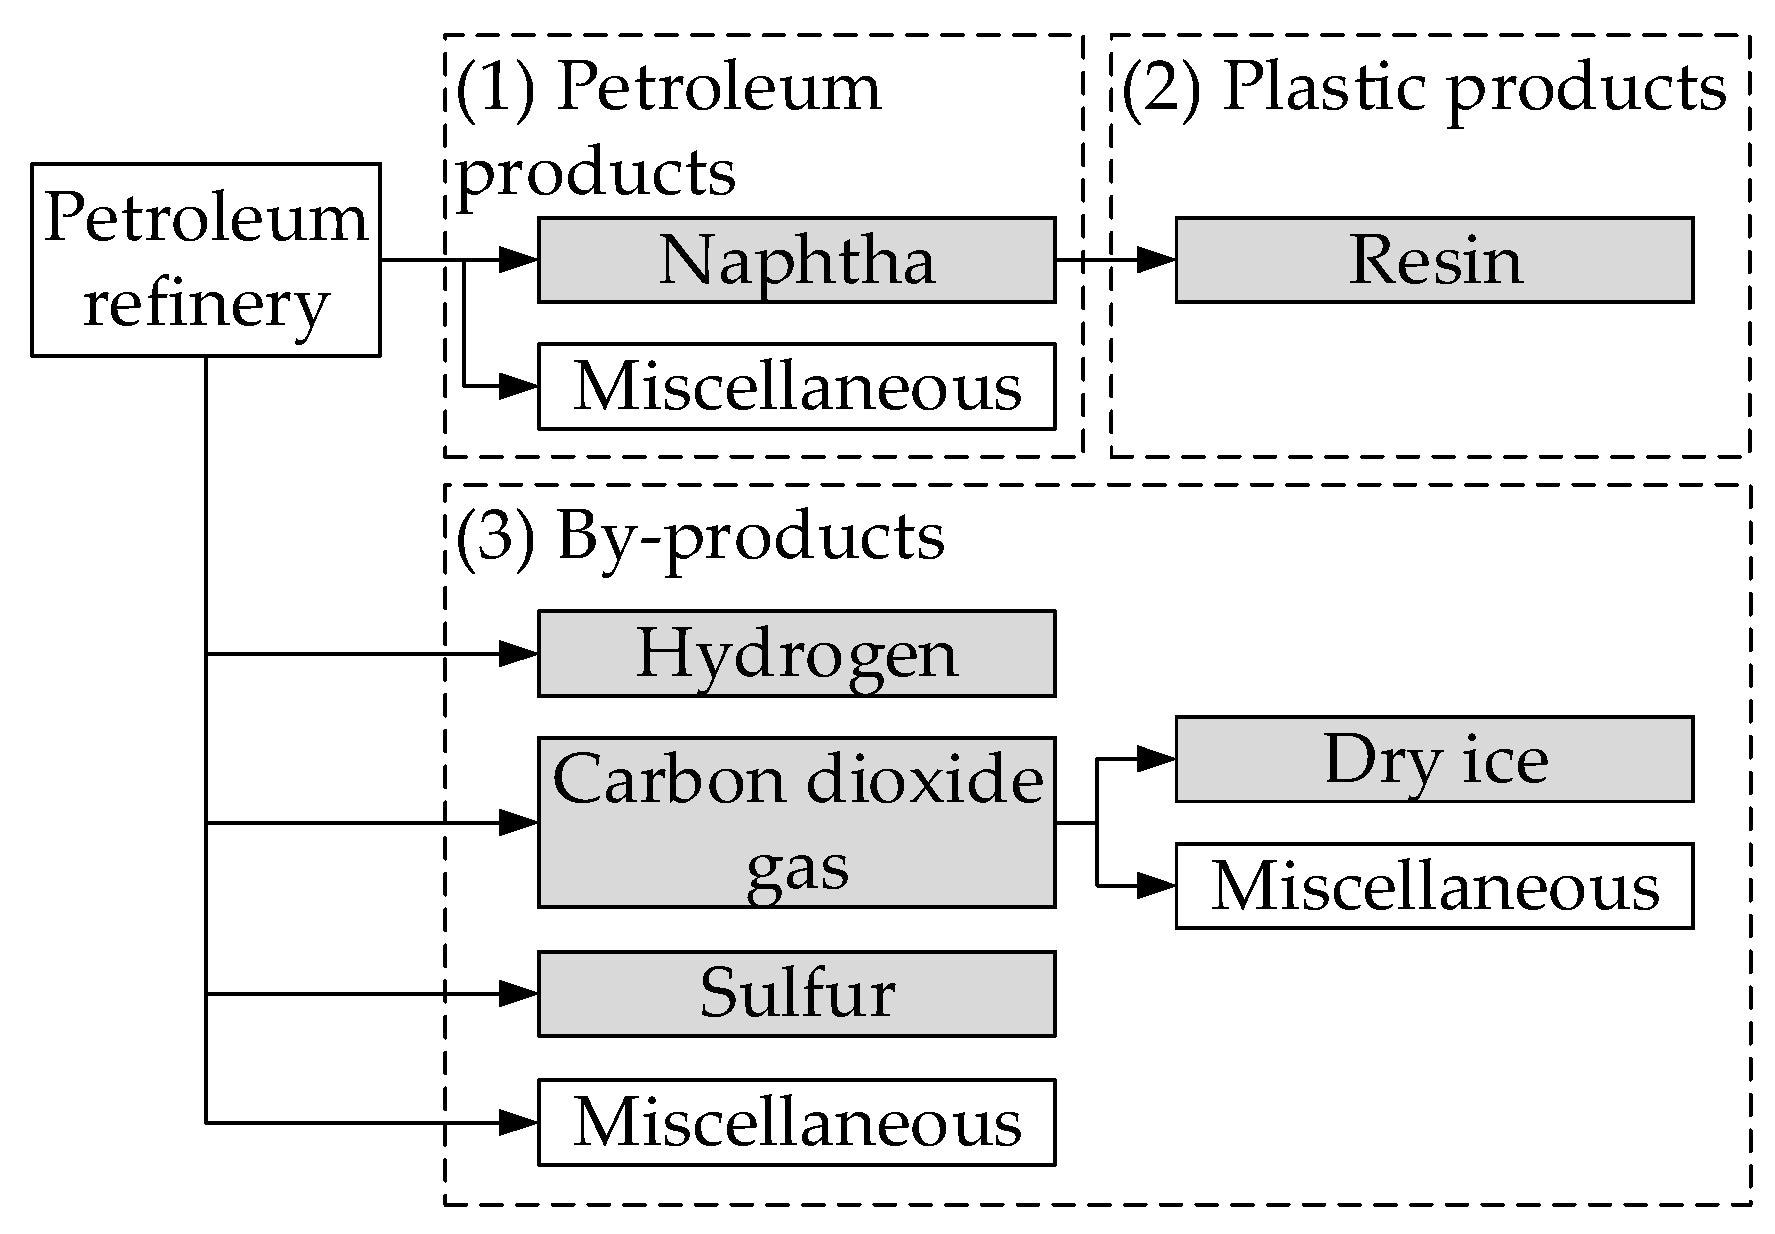 Processes related to petroleum refining.